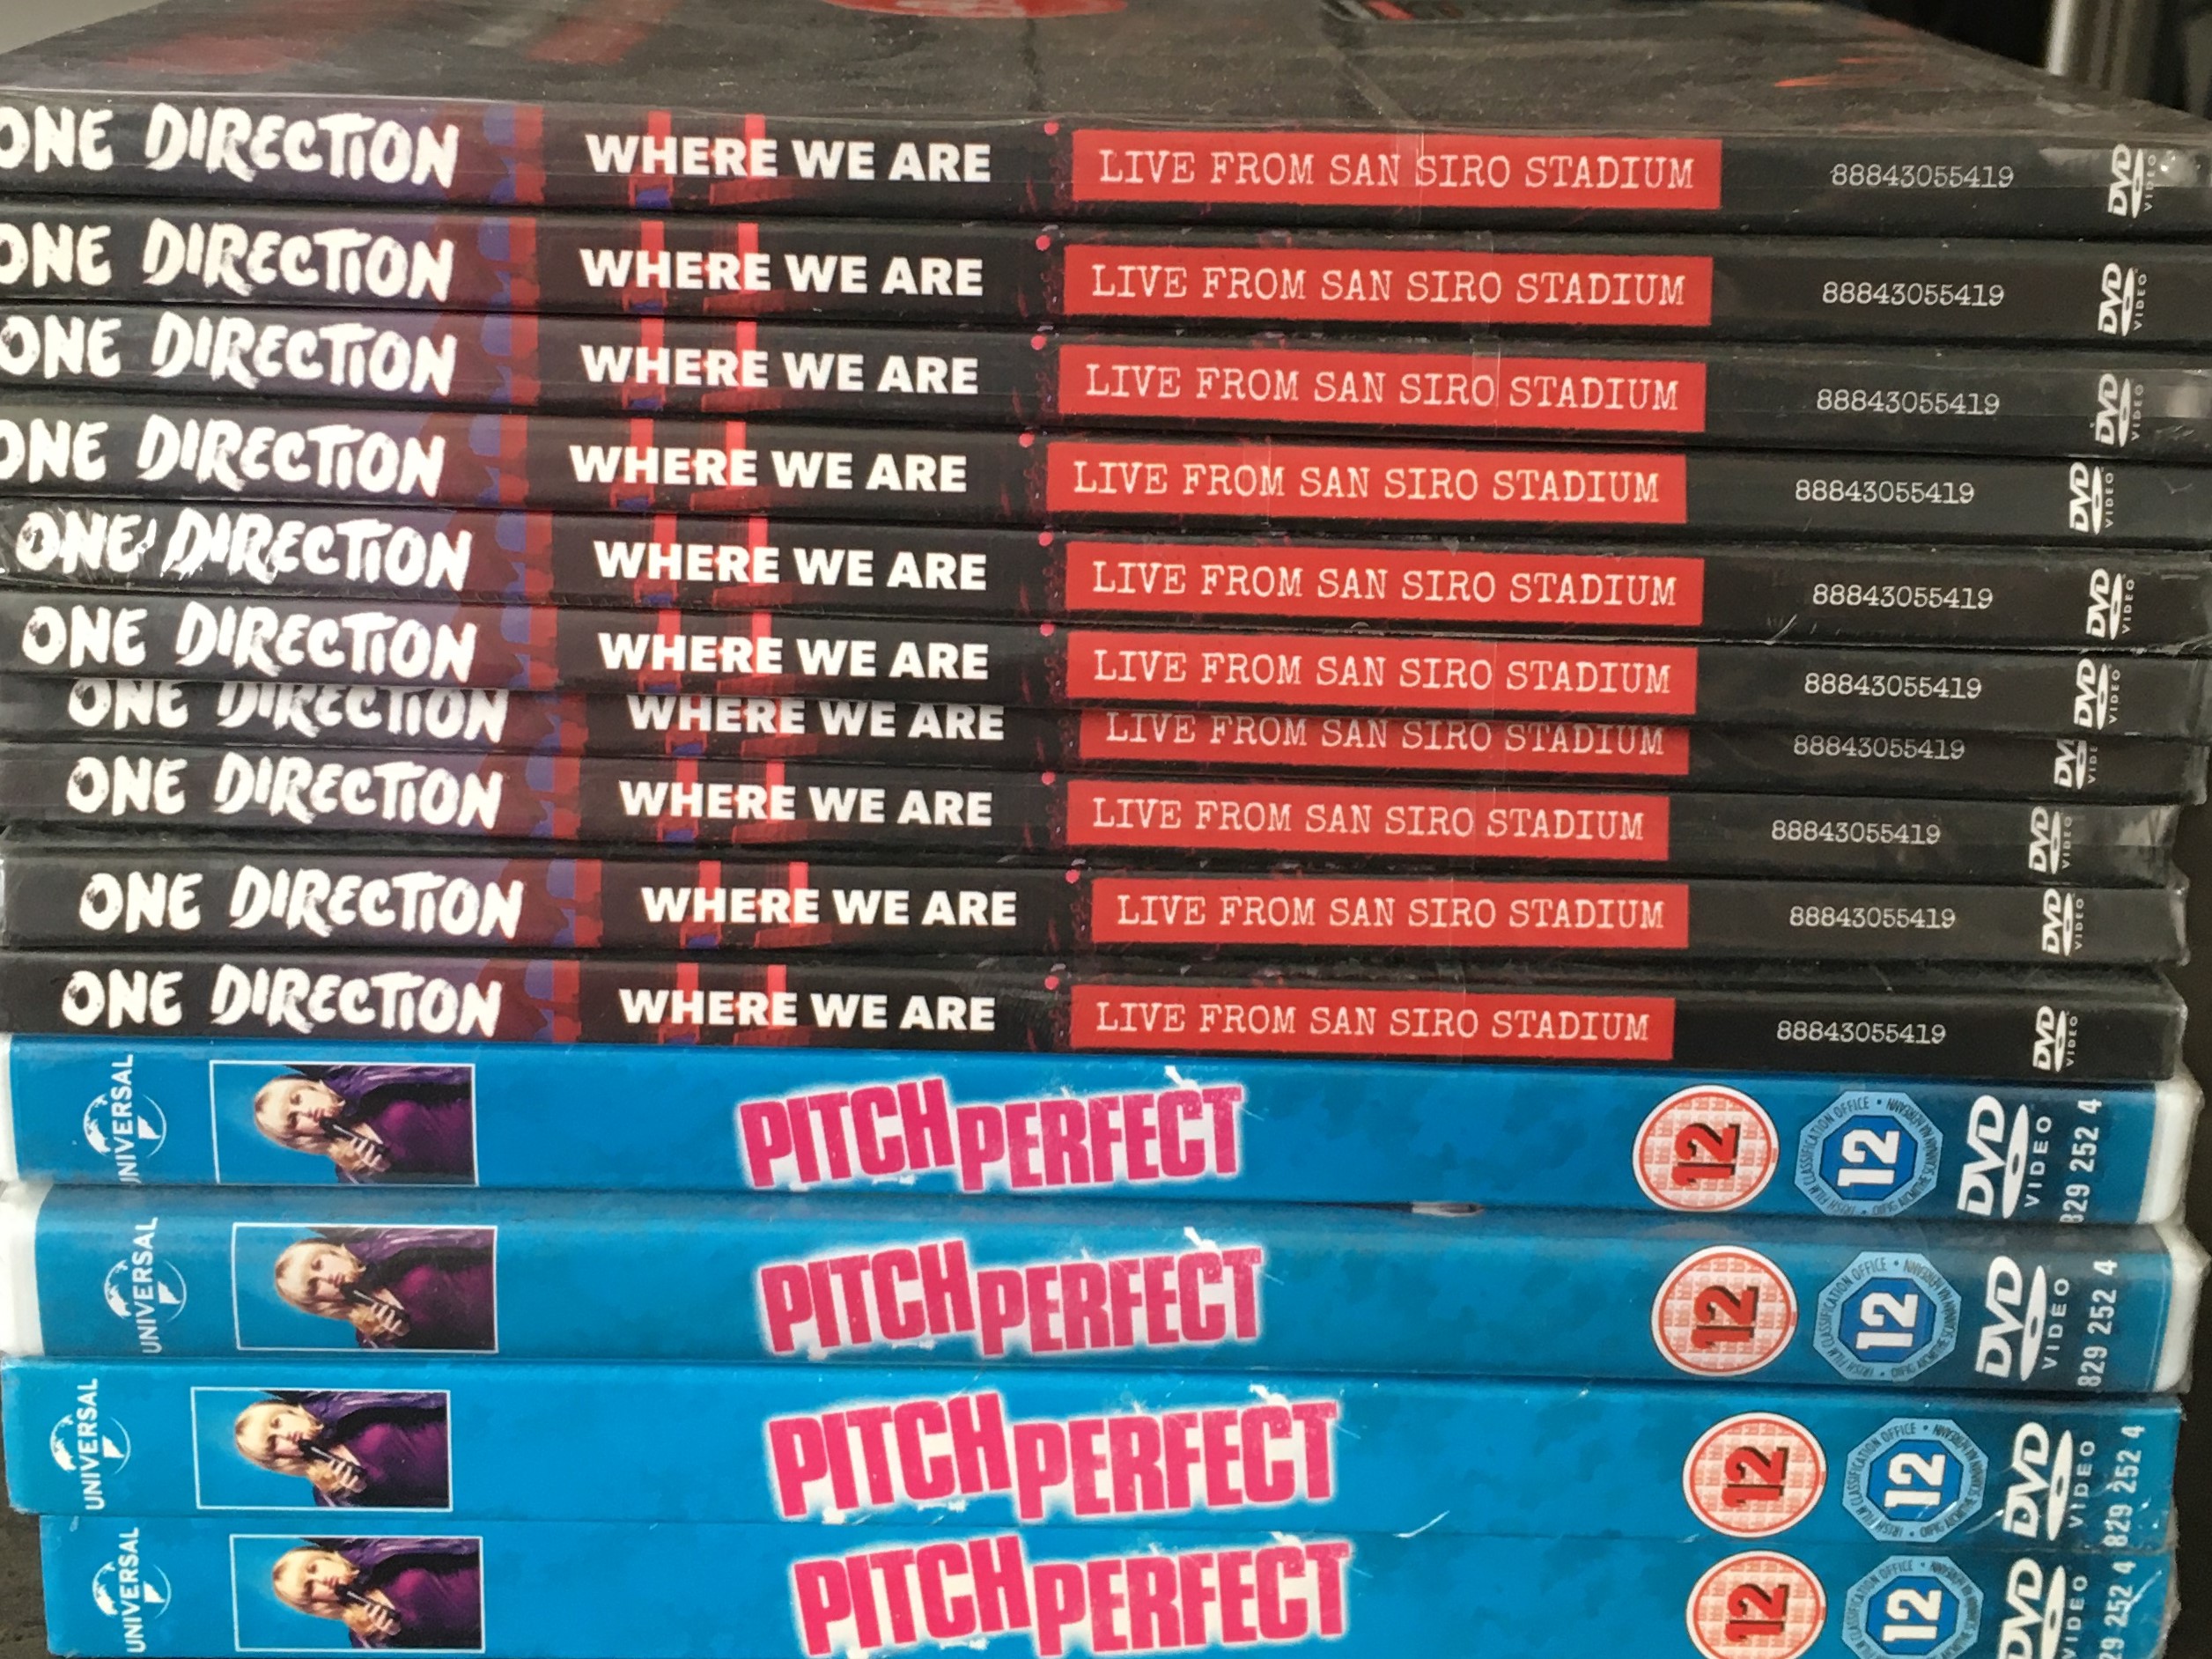 14 x new & sealed Music DVDs pitch perfect & one direction